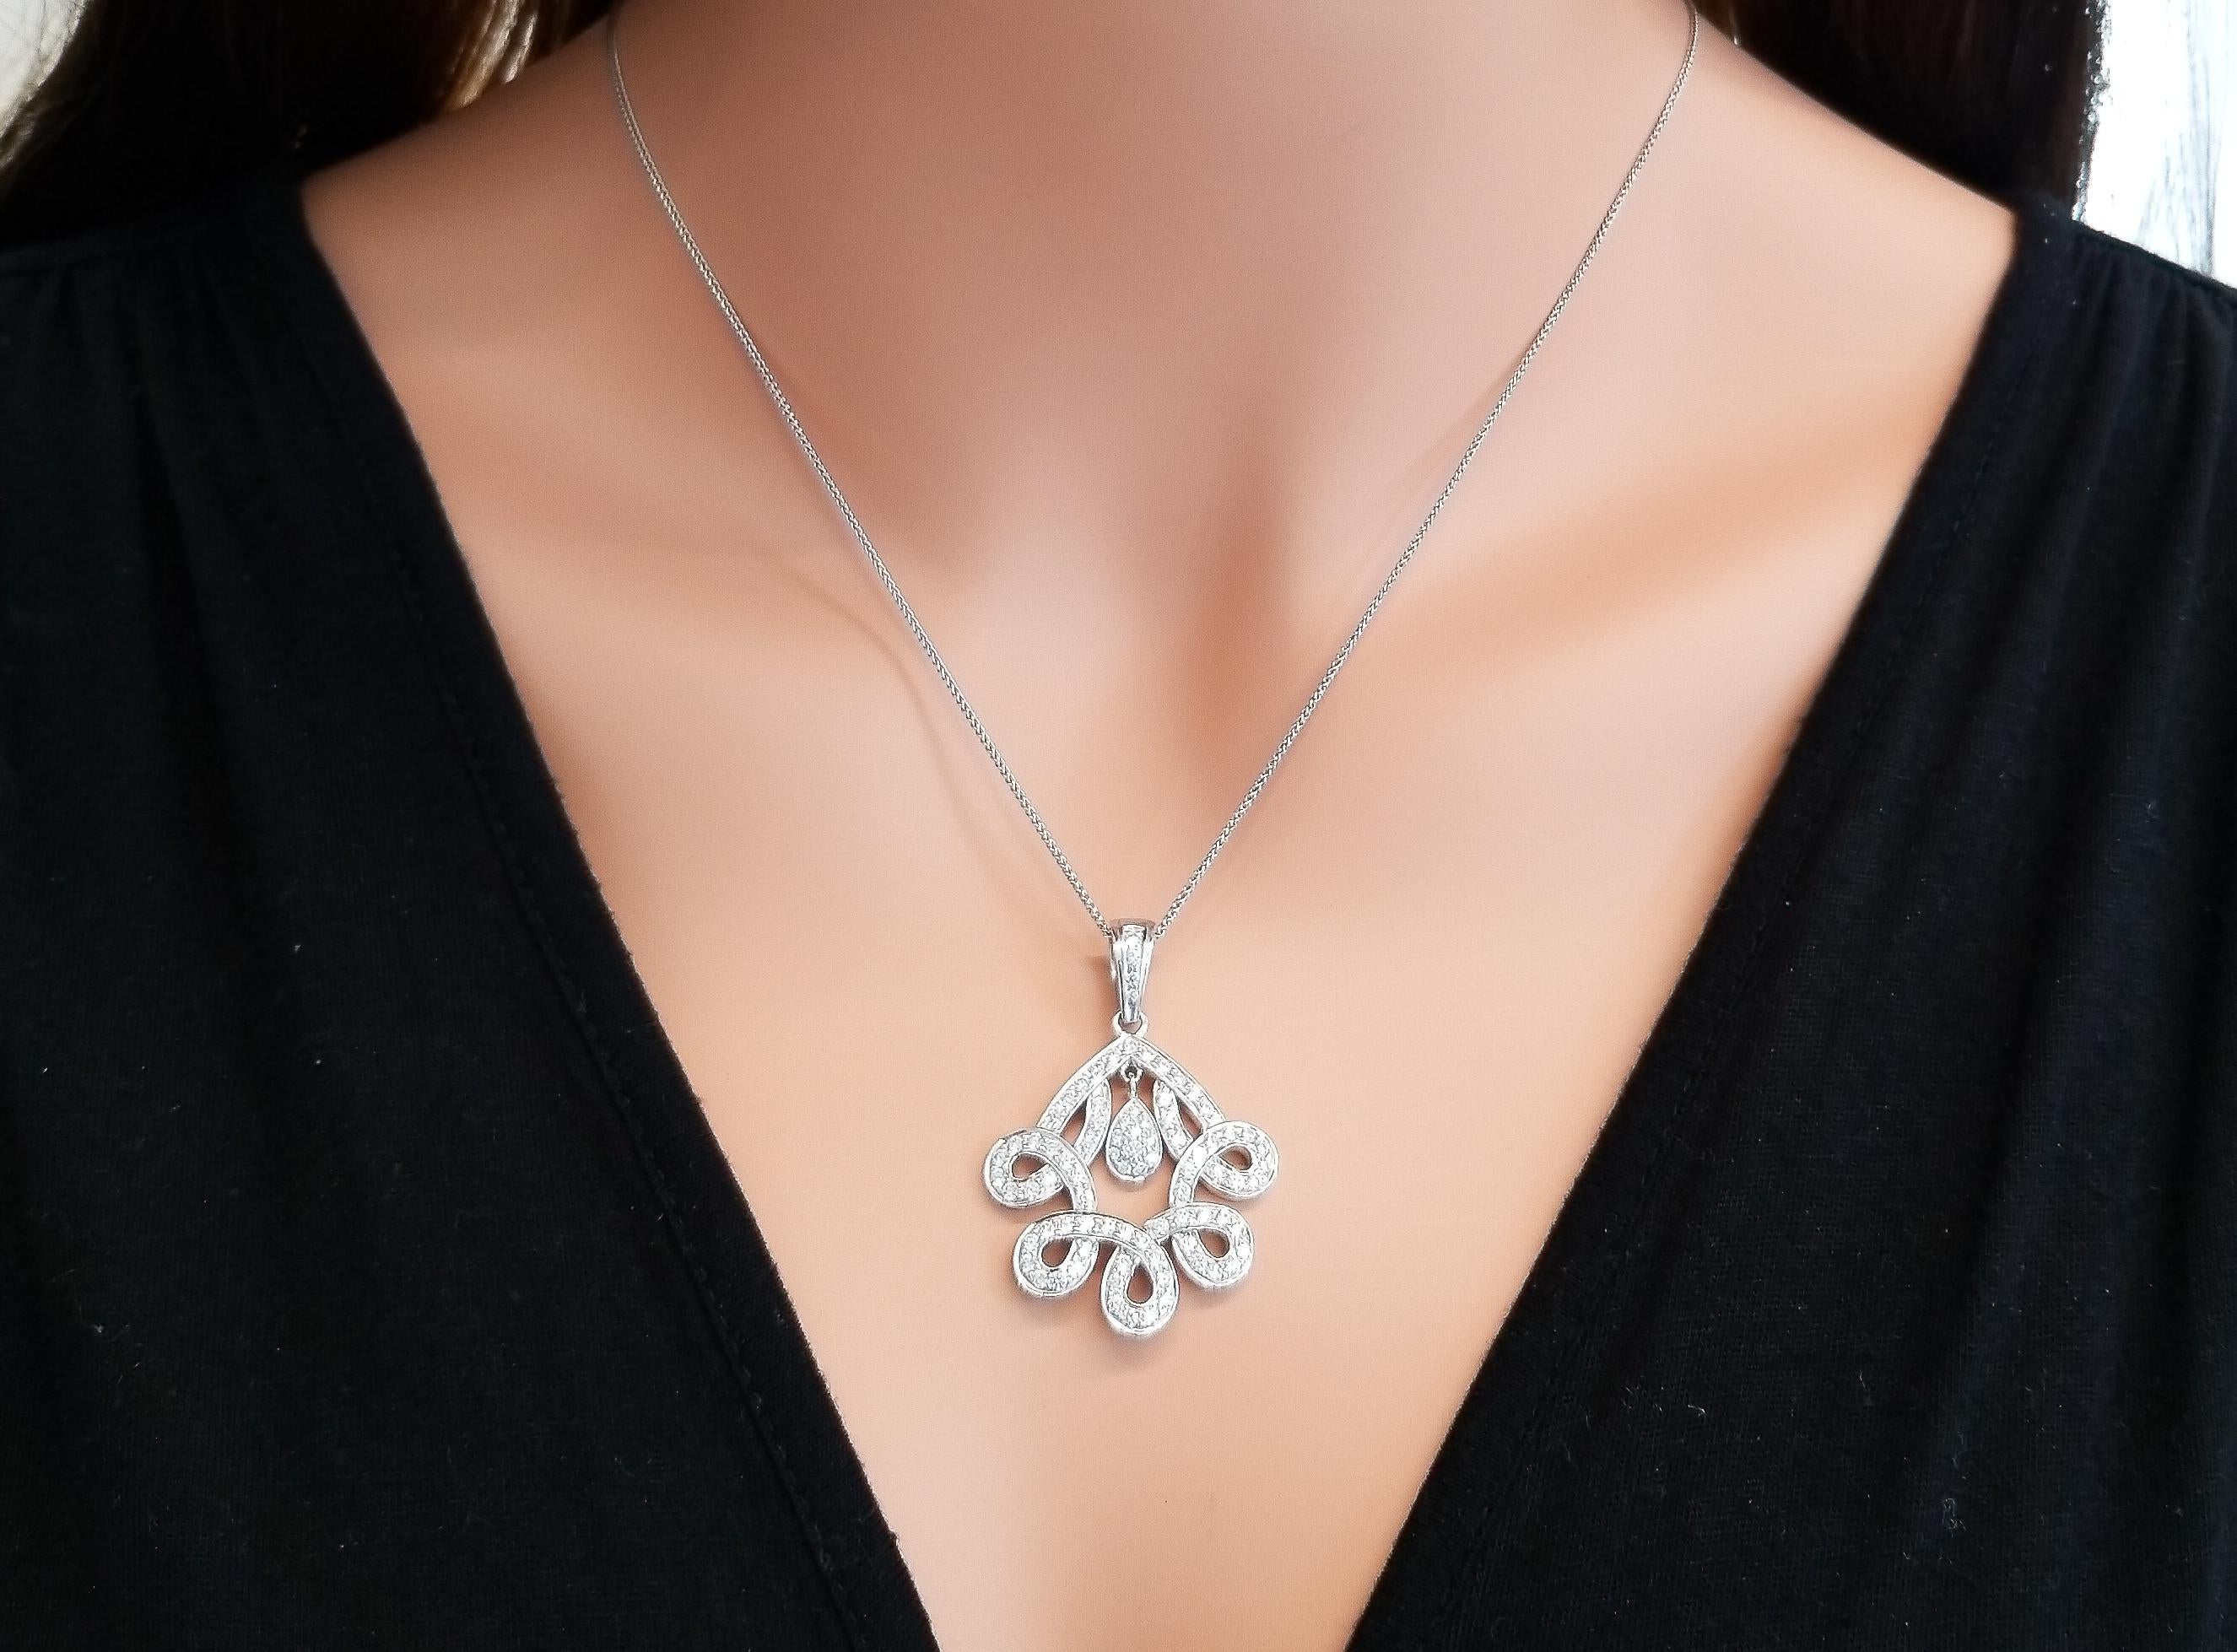 Dare to dazzle, with this spectacular Parisian inspired diamond pendant. This piece features an incredibly attractive and unique design that draws all eyes towards it. The pendant features 1.70 carat brilliant round diamonds that exhibit optimal